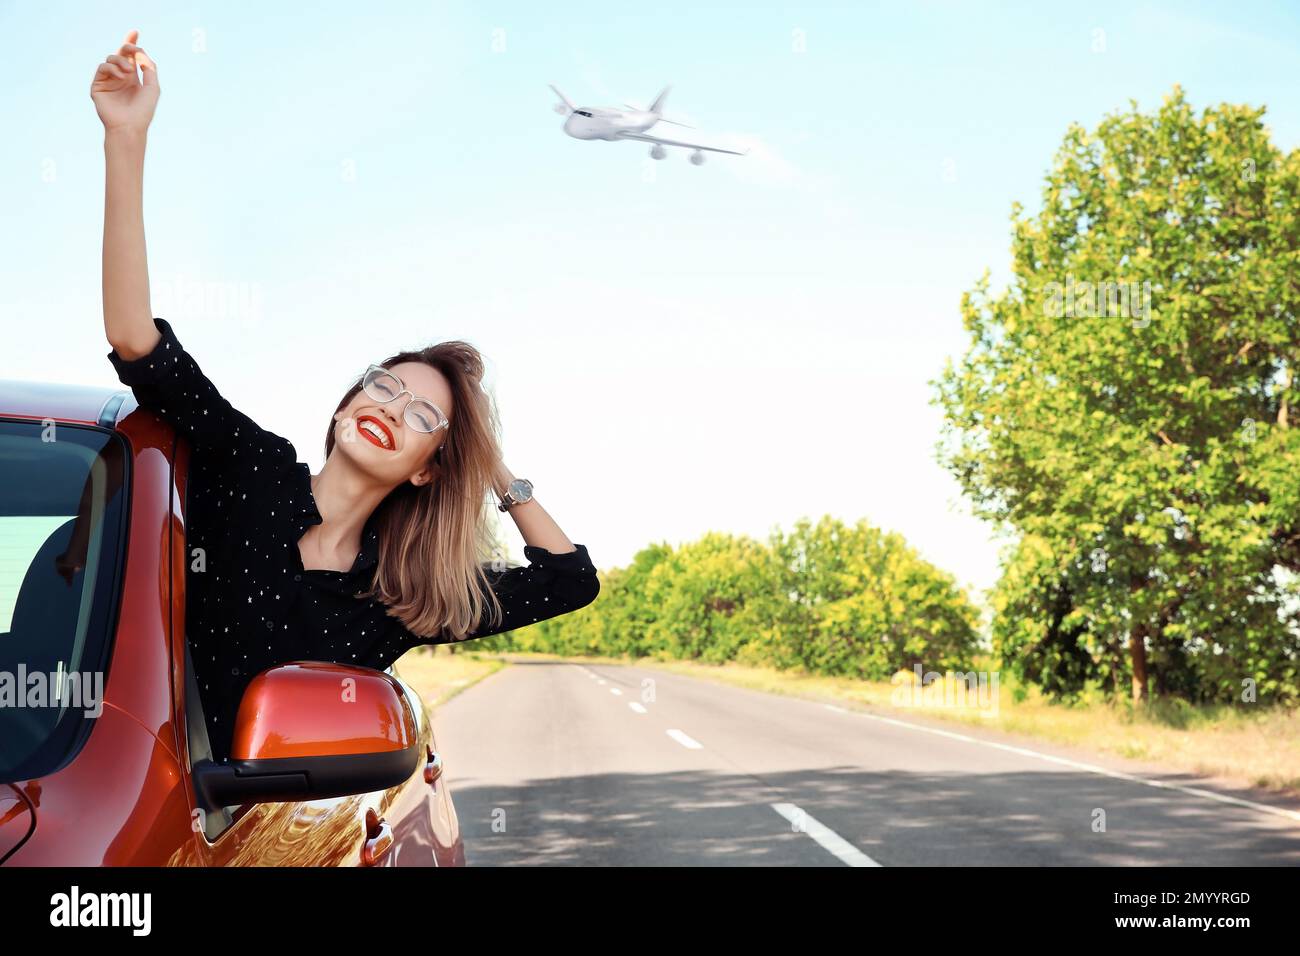 Young woman leaning out of car window and airplane in sky. Summer vacation Stock Photo